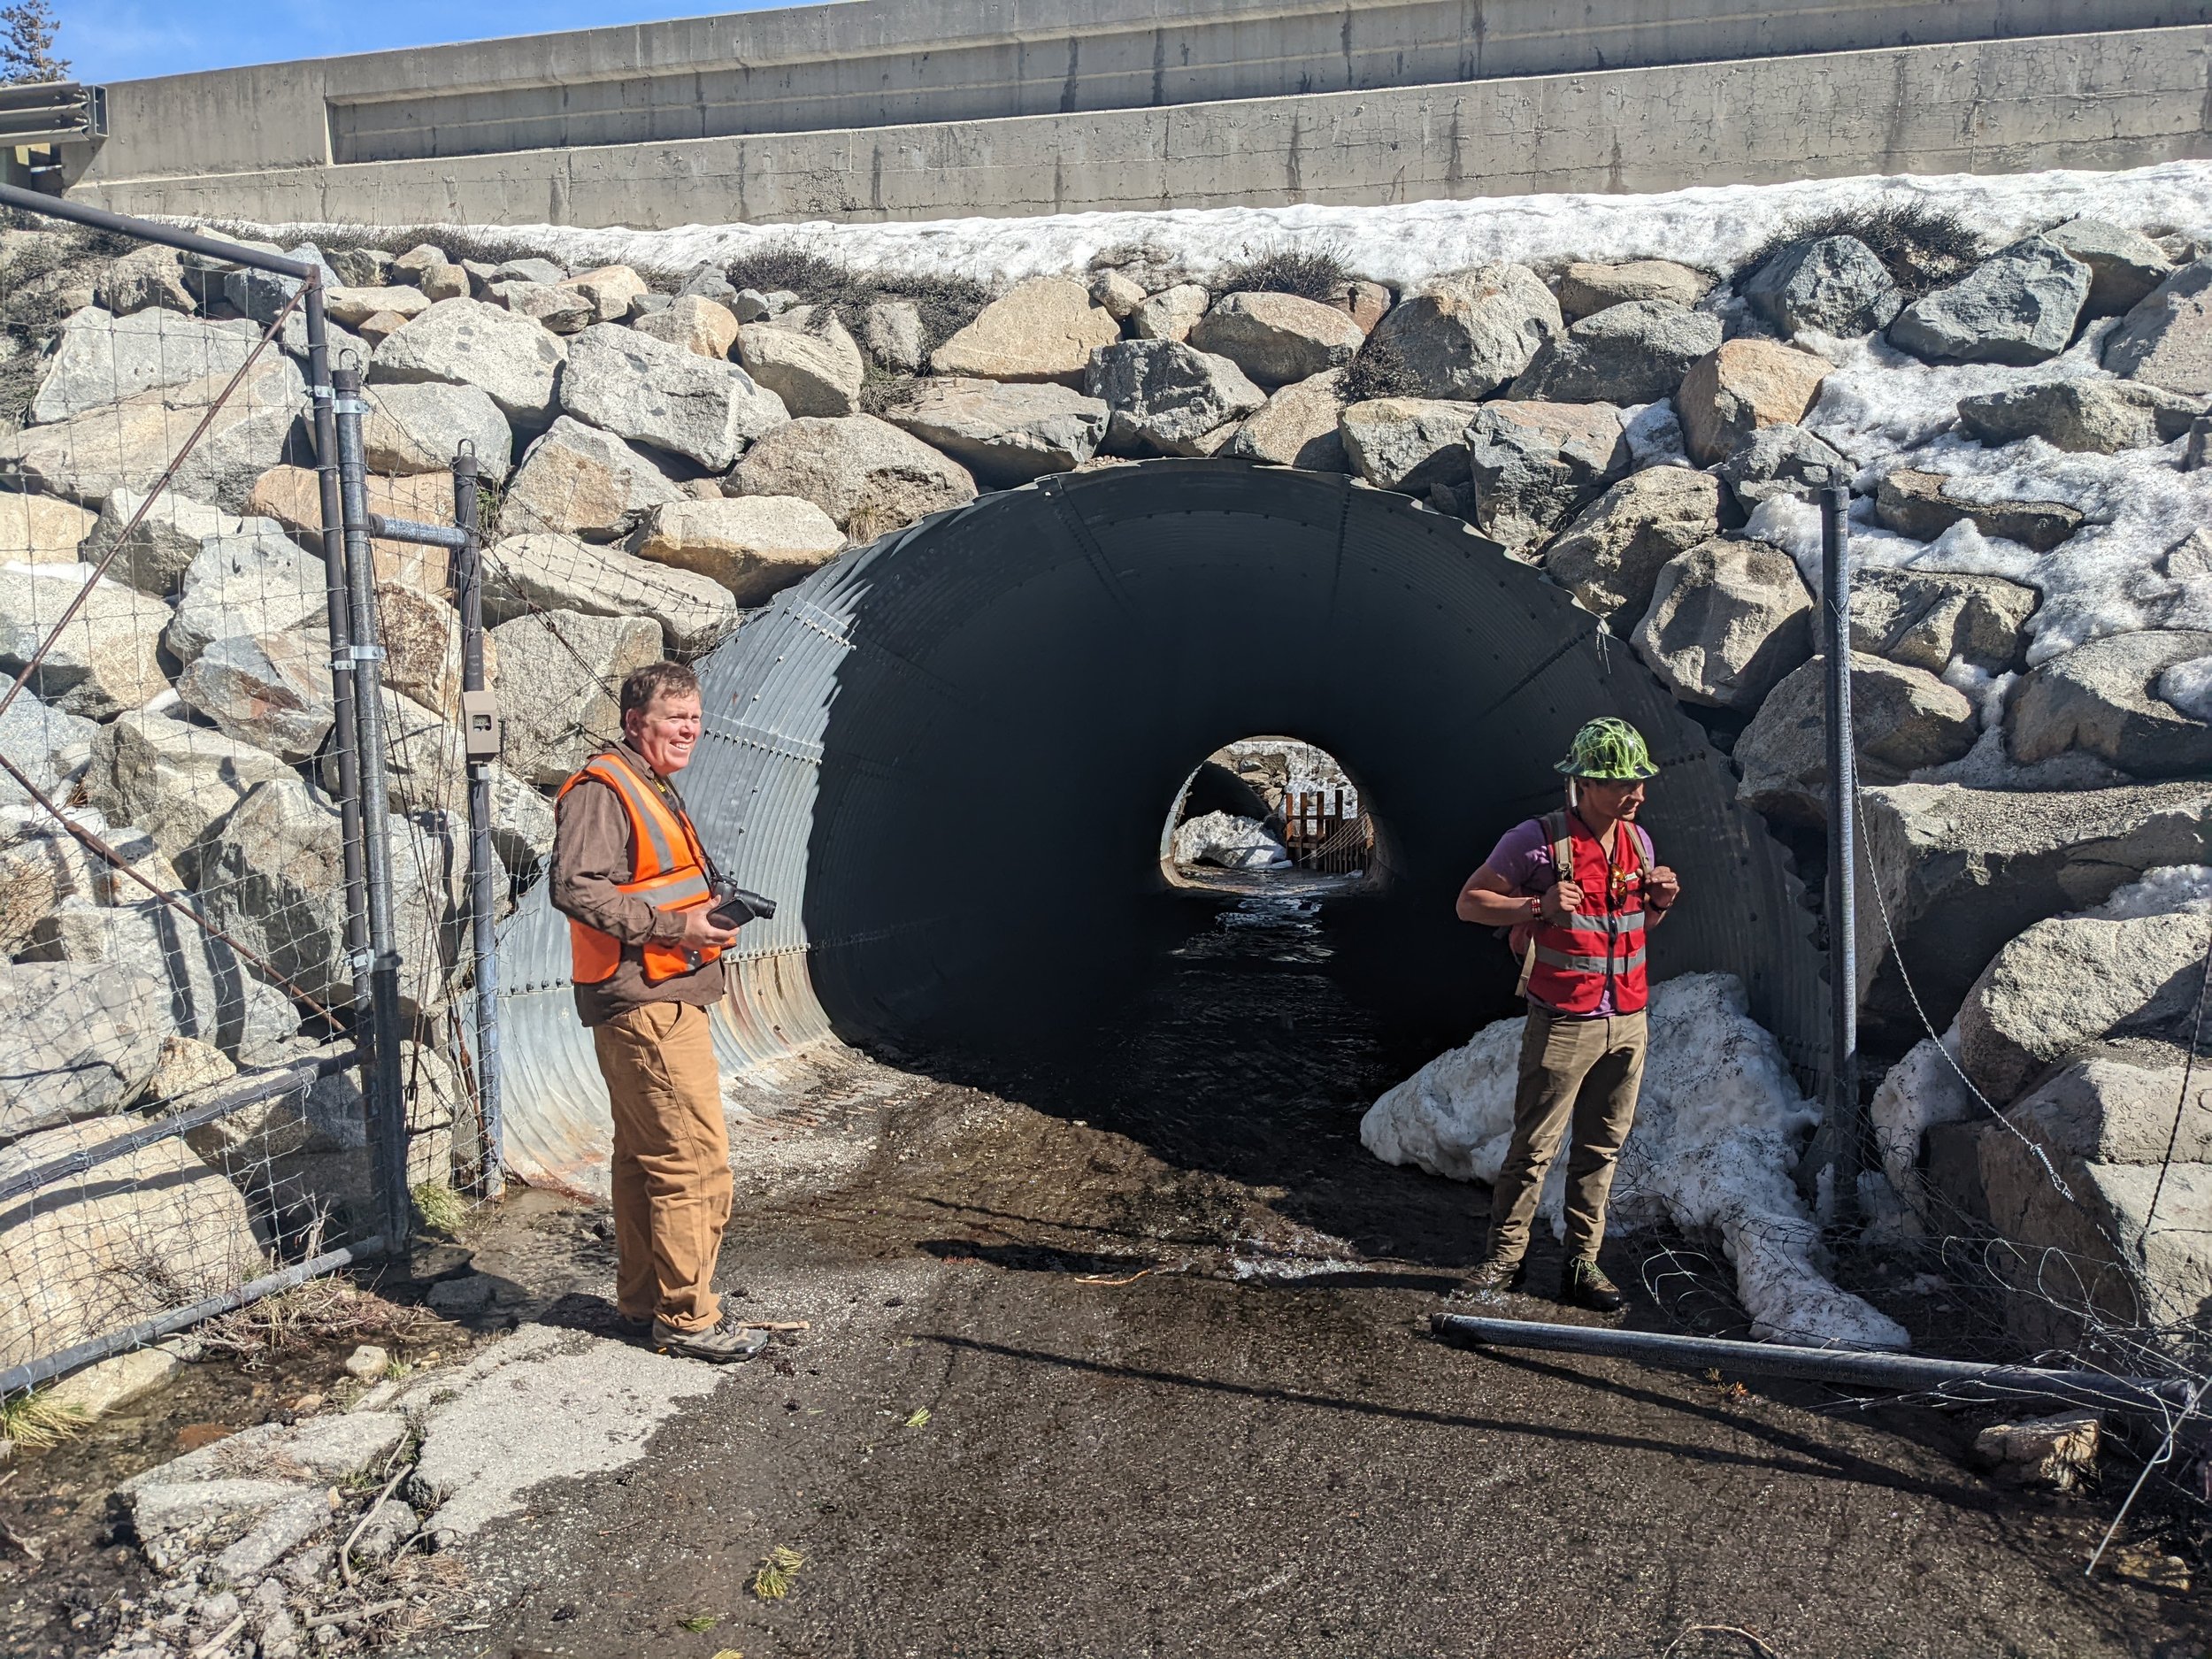  Exploring the existing structures on I-80 allowed us to see examples of the impressive wildlife underpasses that Caltrans has constructed along I-80. The expertise of Ahiga and Wildlands Network Chief Scientist Dr. Ron Sutherland were invaluable for